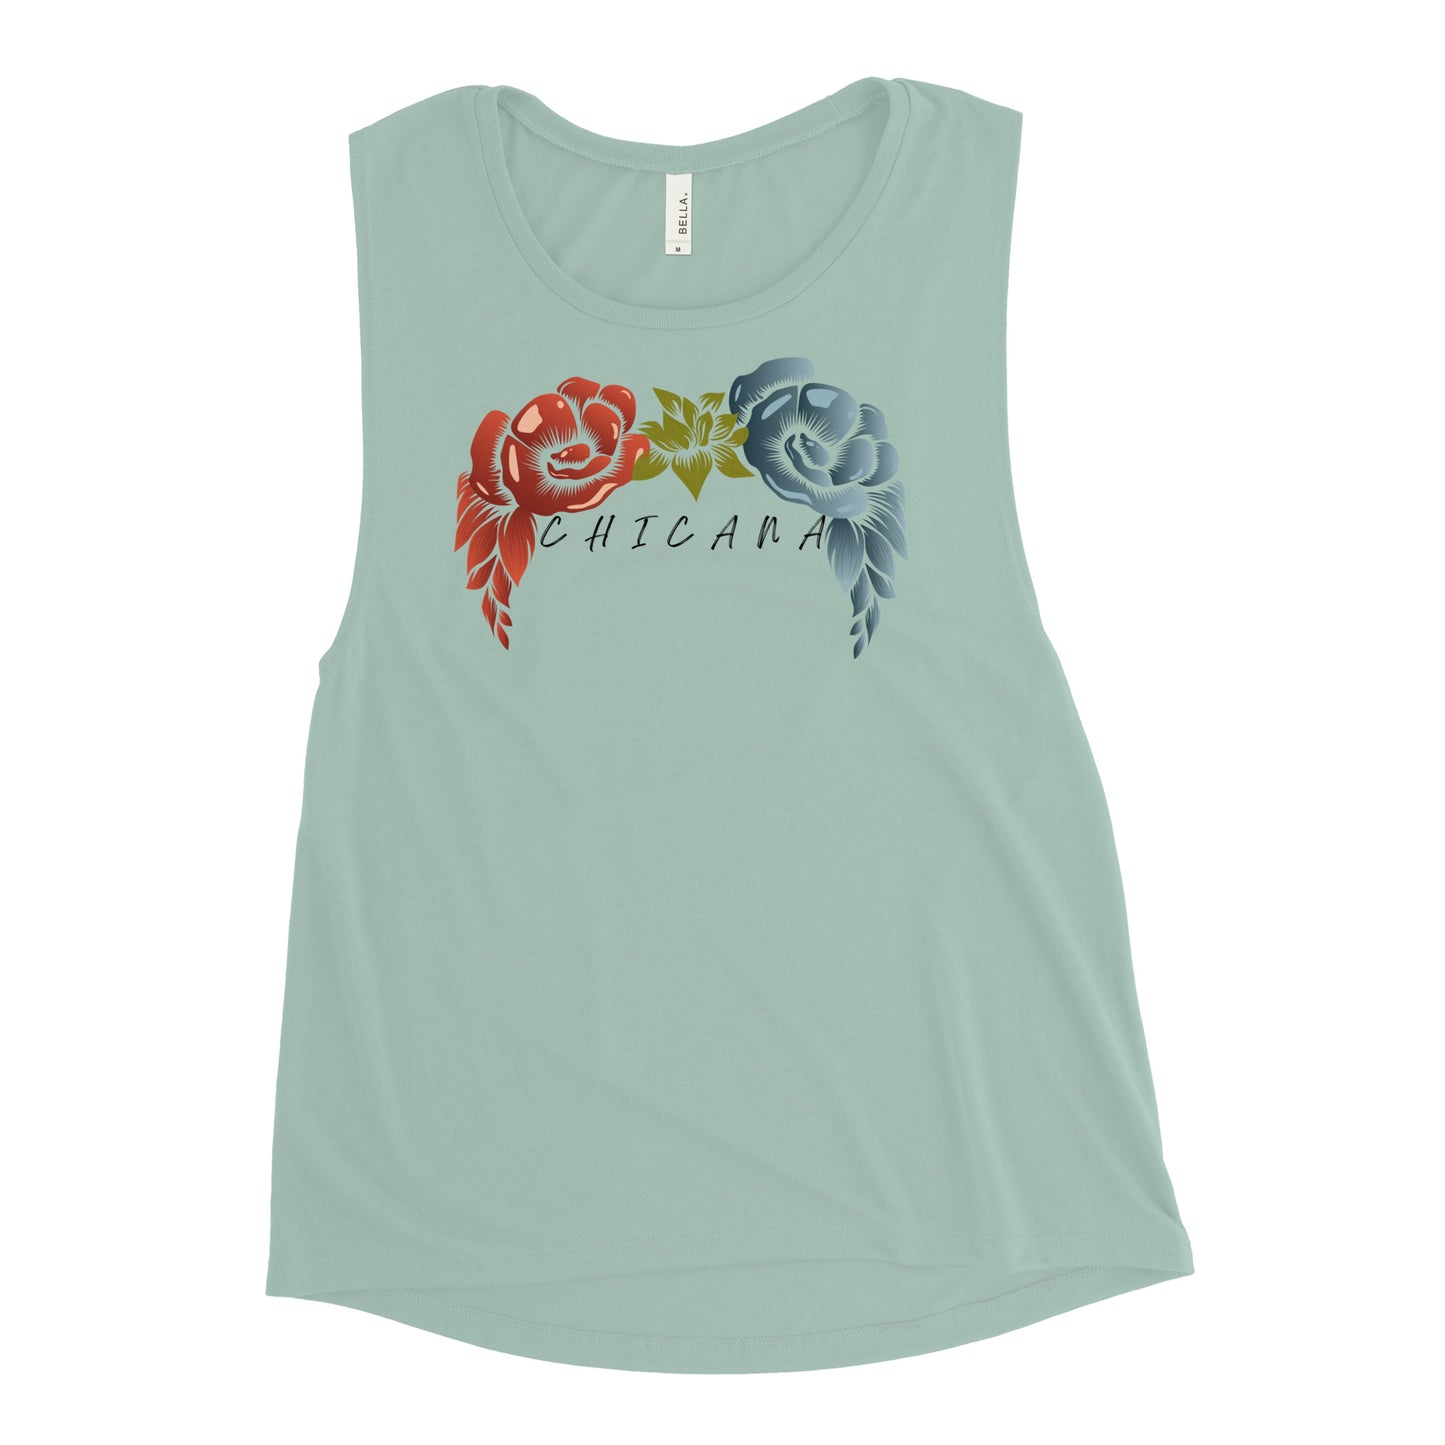 Chicana Ladies’ Muscle Tank